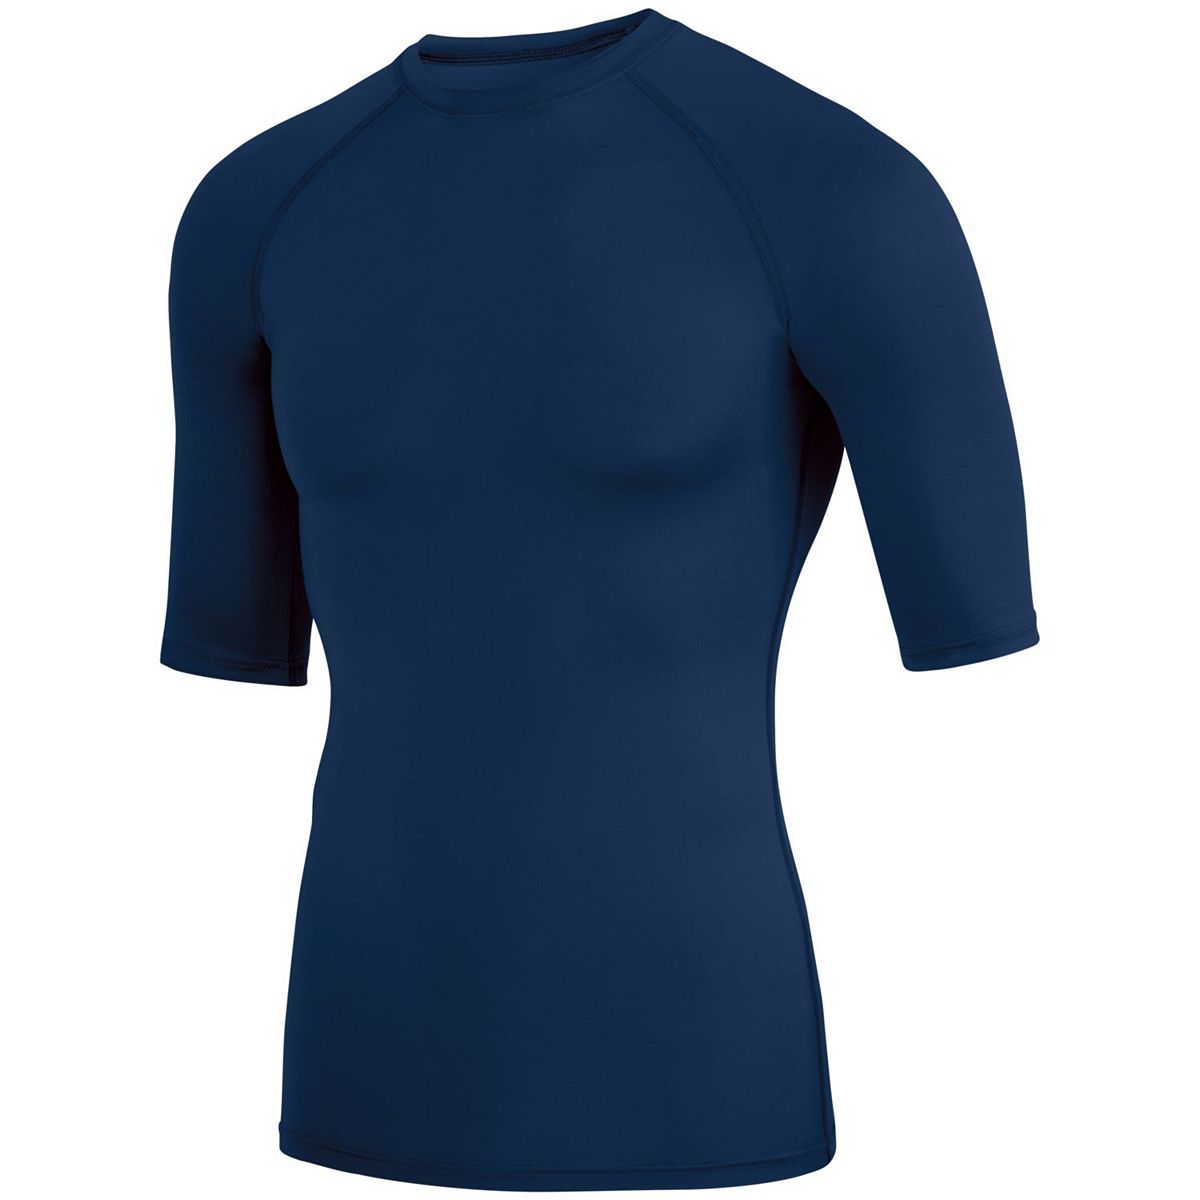 Youth Hyperform Compression Half Sleeve Tee 2607